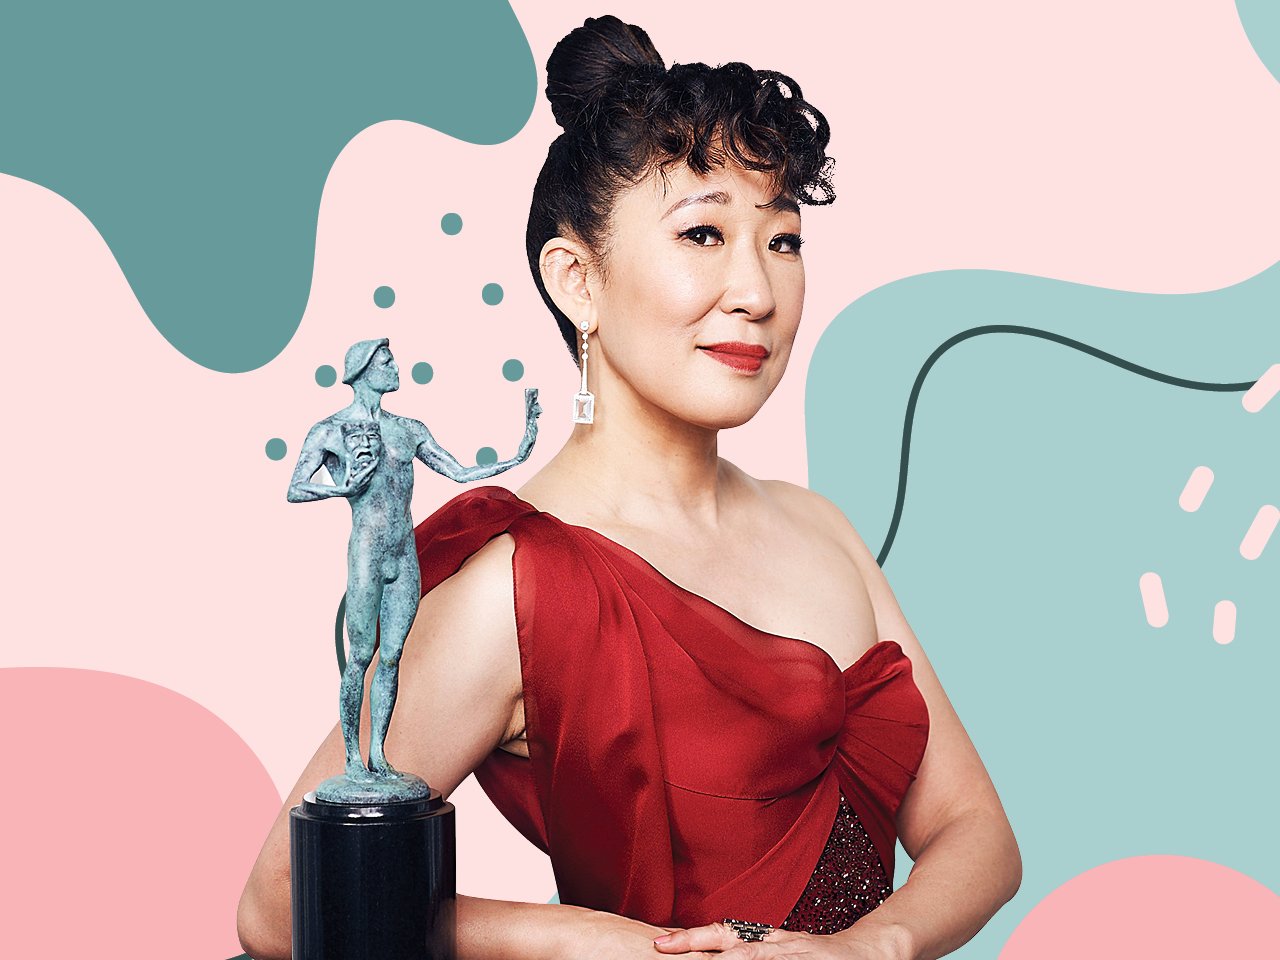 Image of Sandra Oh in a red dress posing next to an award